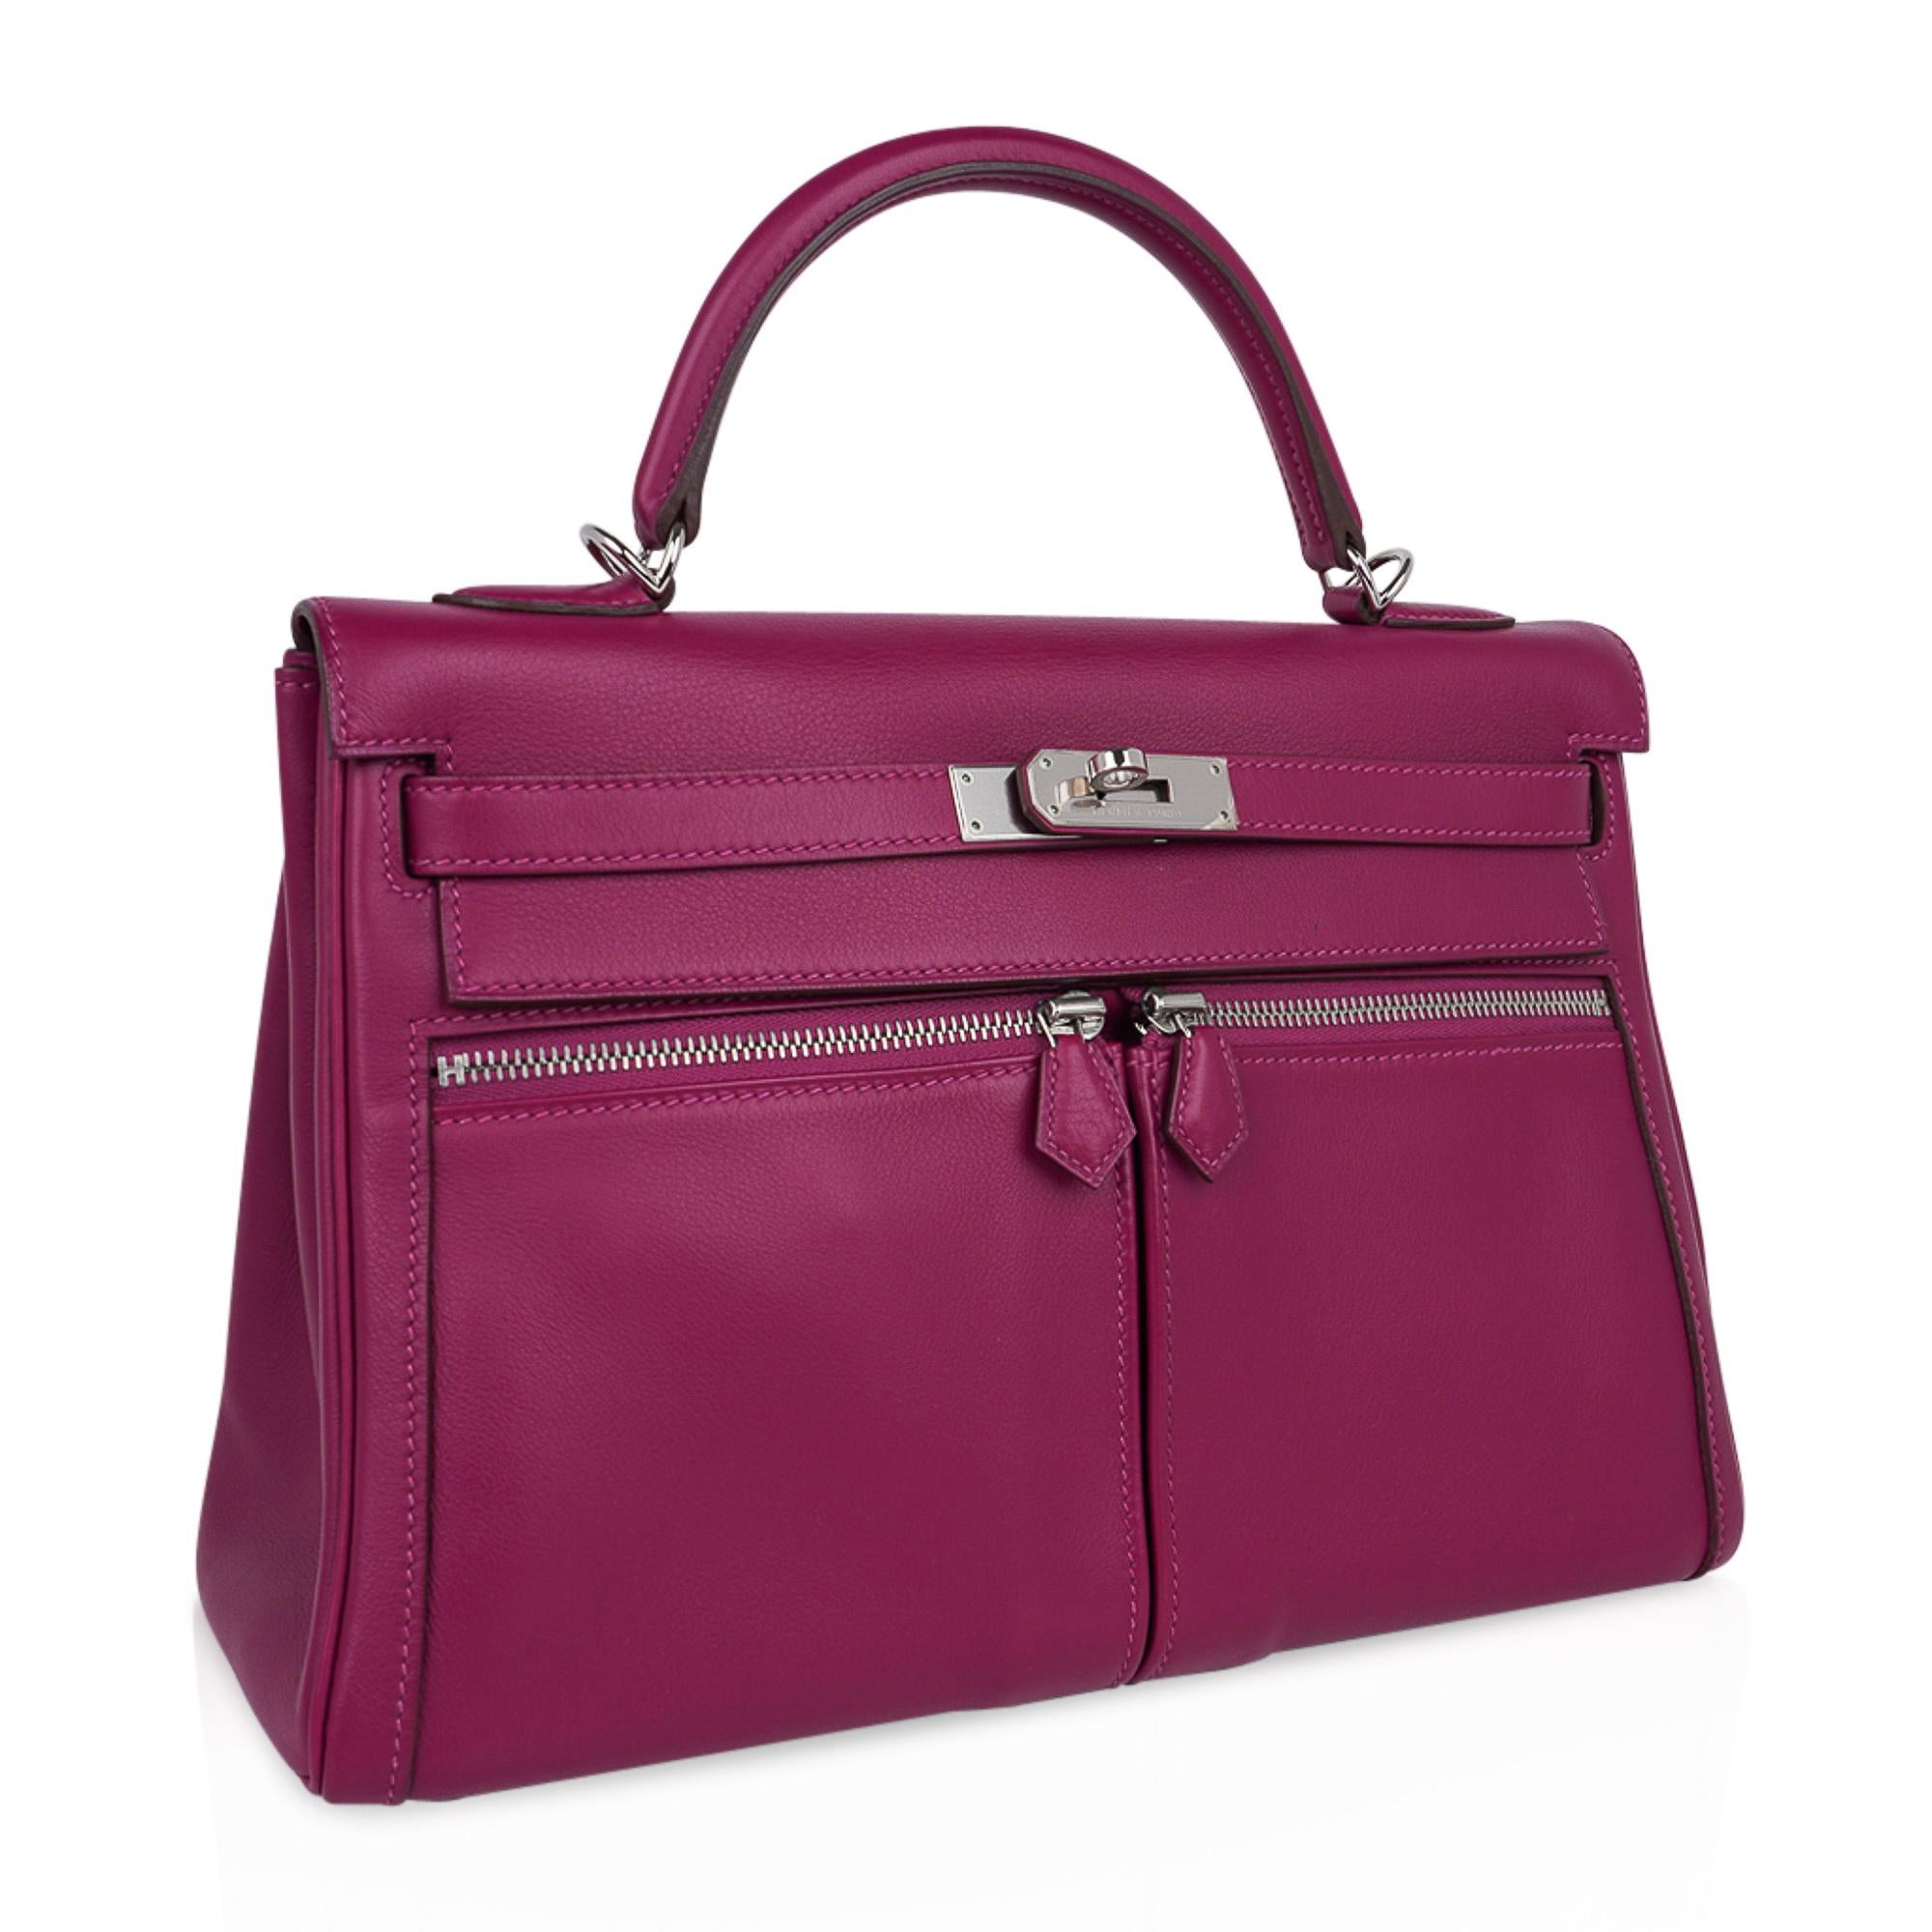 Mightychic offers an Hermes 32 Kelly Lakis bag featured in rich, saturated Tosca.
Signature front and zipper pockets.
Swift leather with Palladium hardware.  
This beauty is sure to become your ultimate go to bag!
Comes with strap, sleepers, lock,